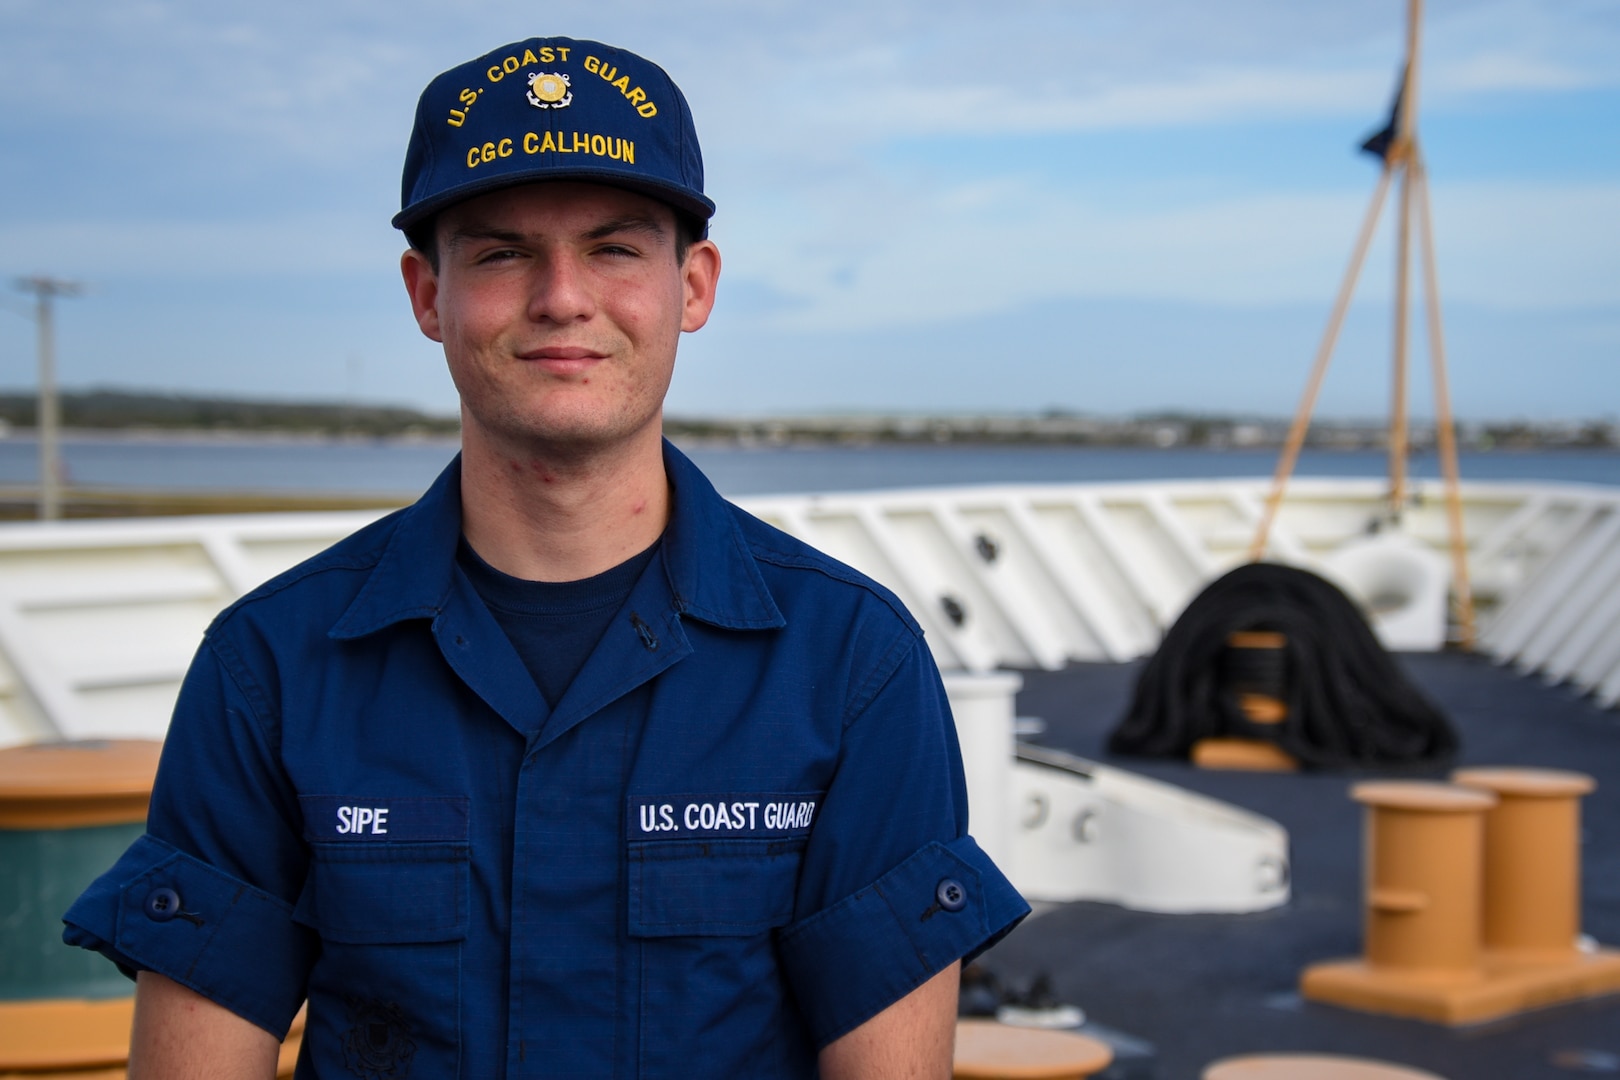 U.S. Coast Guard Seaman Alec Sipe, a crewmember assigned to the Coast Guard Cutter Calhoun (WMSL 759),  poses for a portrait on the focsle of the Calhoun at Naval Station Mayport, Florida, Dec. 1, 2023. Sipe works in the deck department and intends to pursue the machinery technician rating following his tour aboard the Calhoun.